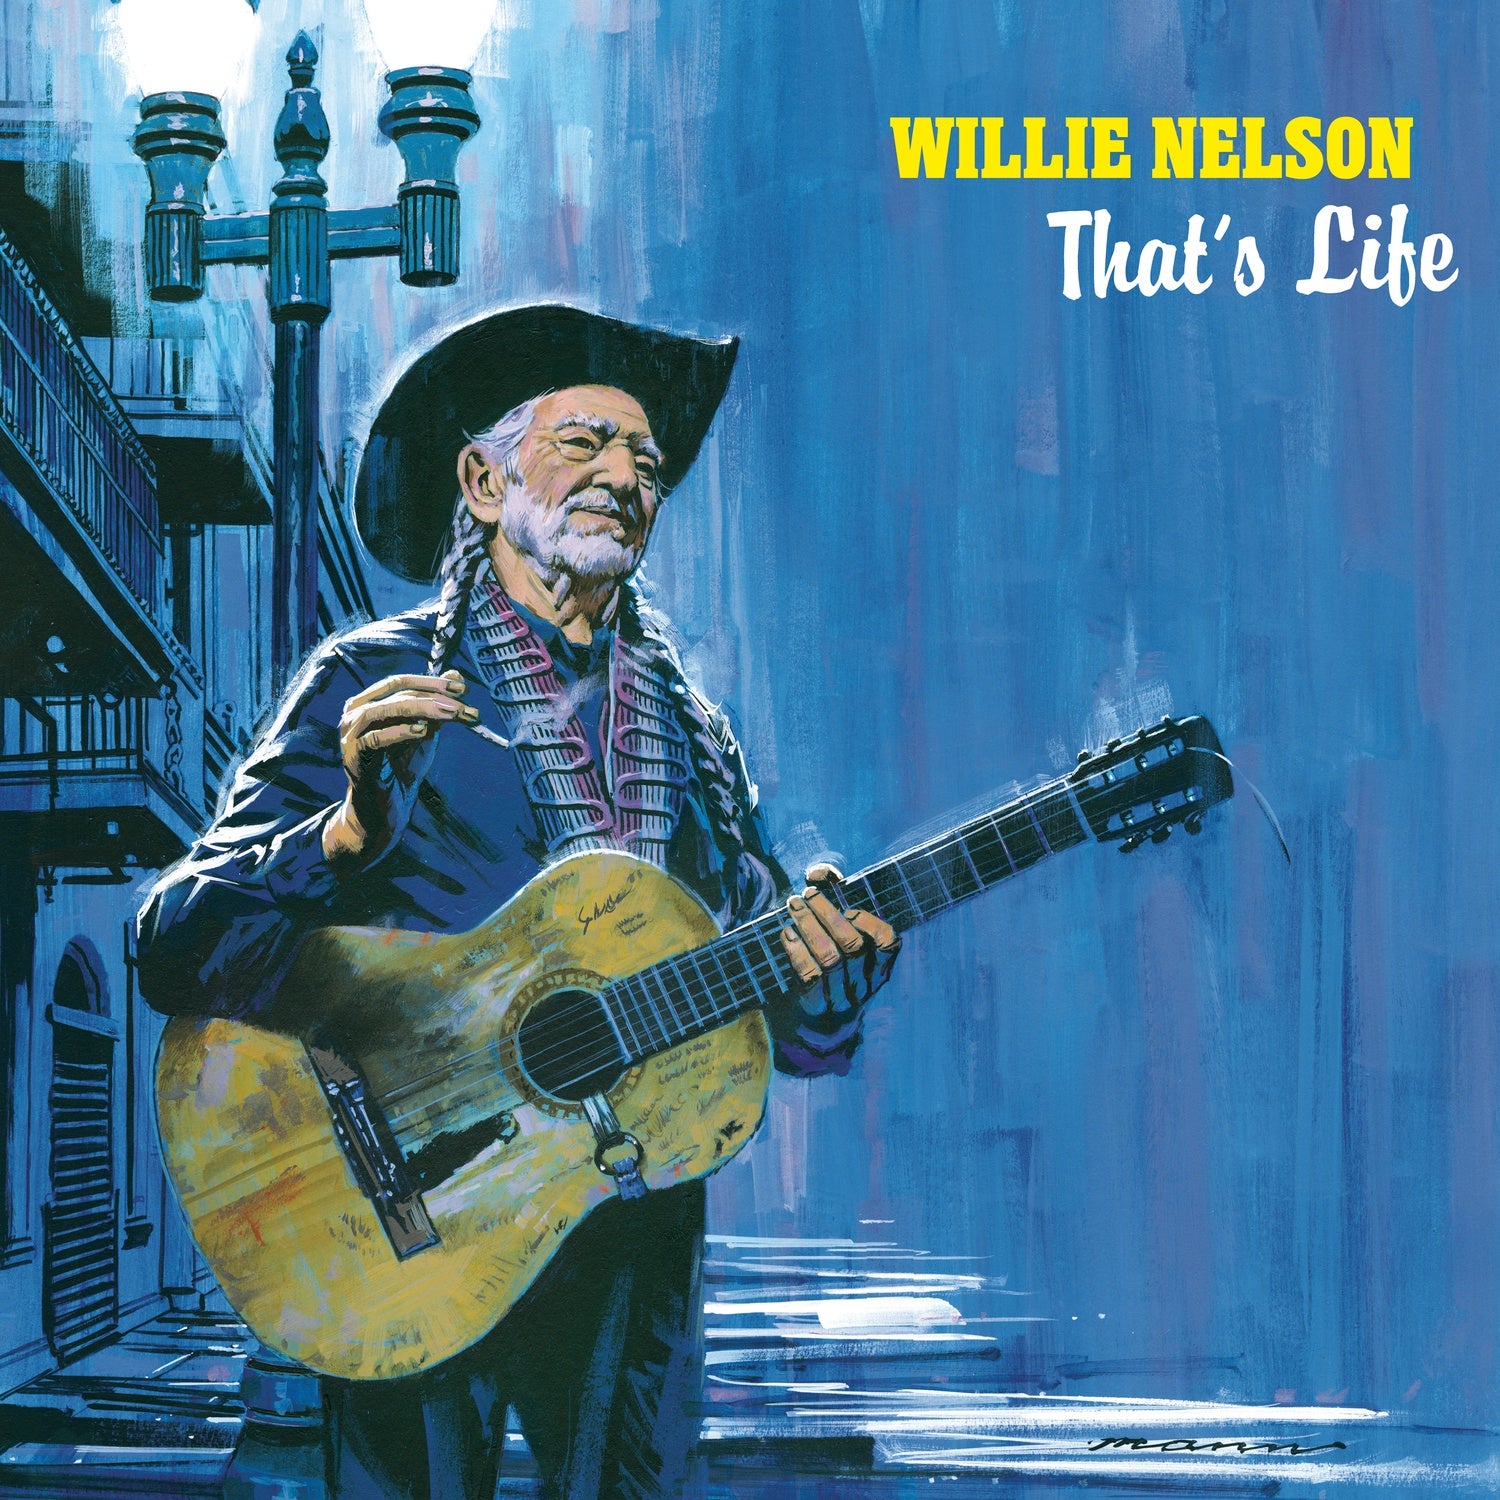 Willie Nelson - That's Life - New LP Record 2021 Legacy Mexico Import Vinyl - Country